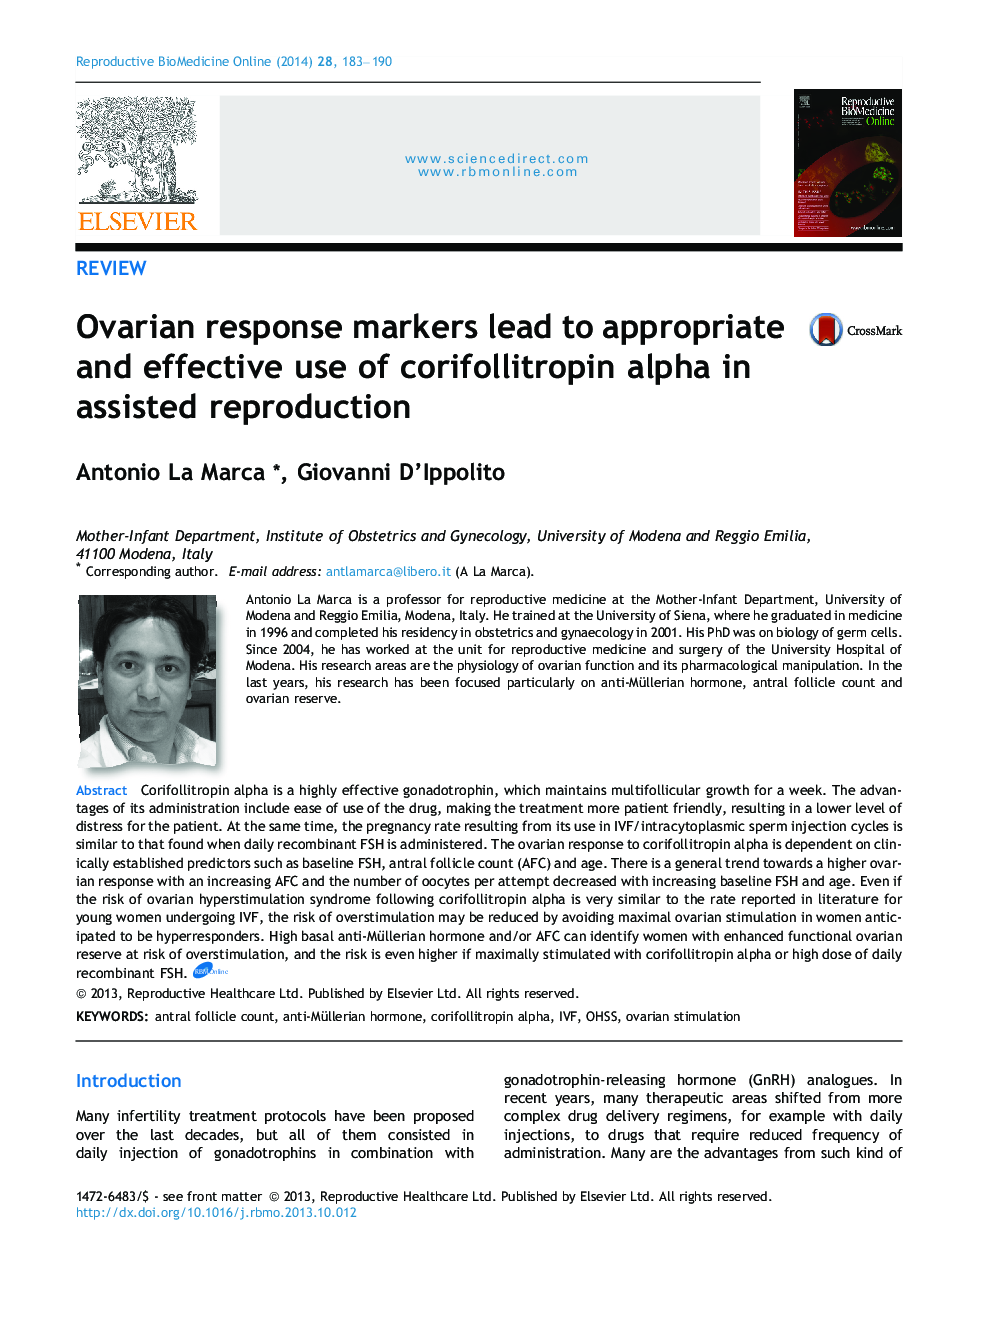 Ovarian response markers lead to appropriate and effective use of corifollitropin alpha in assisted reproduction 